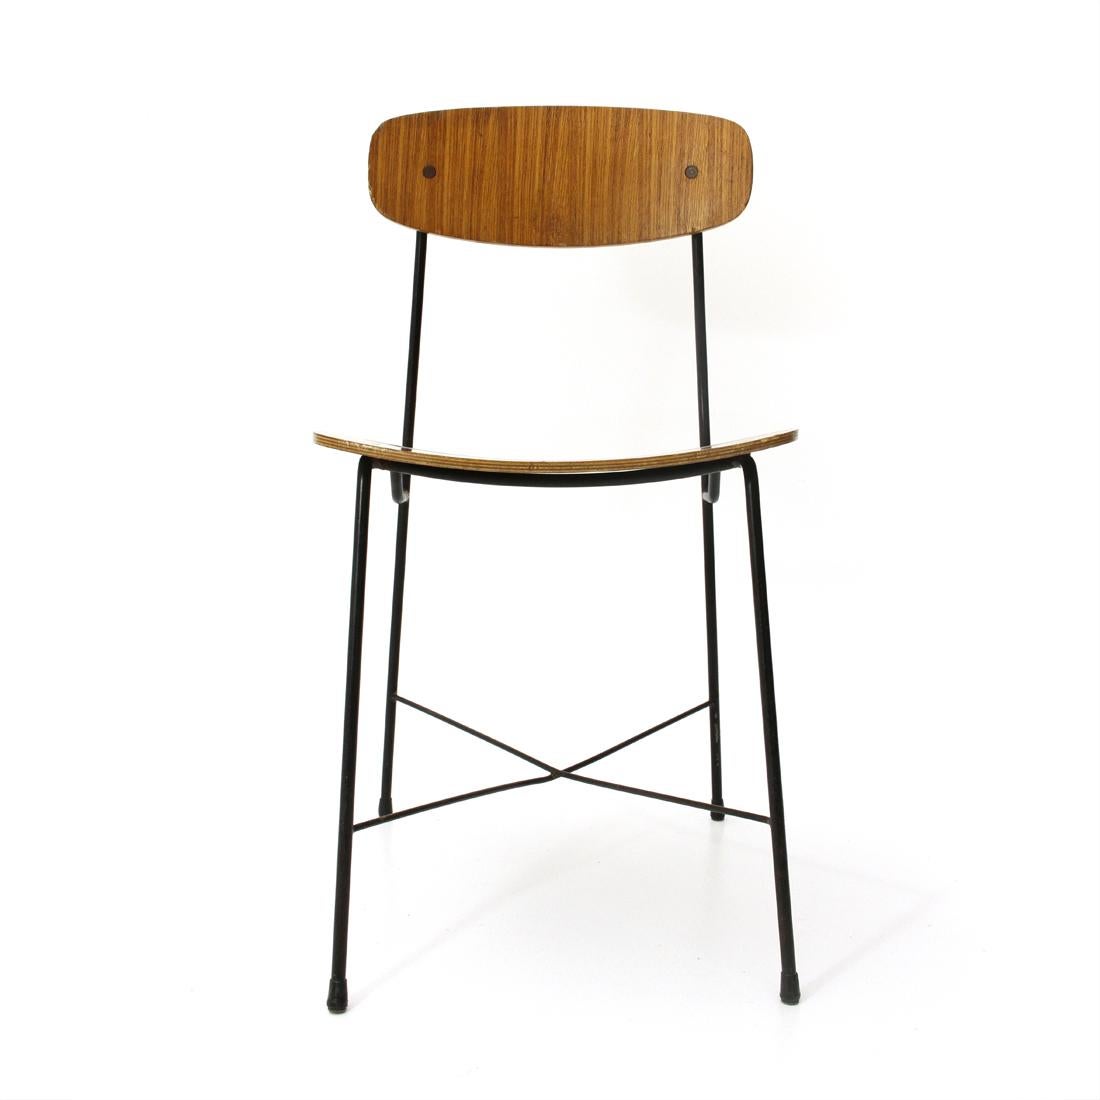 Chair in bentwood produced by Faram on George Coslin design in the 1950s.
Structure in black painted metal, shell in hot curved plywood.
Good general conditions, some signs due to normal use over time.

Dimensions: Width 43 cm, depth 45 cm,